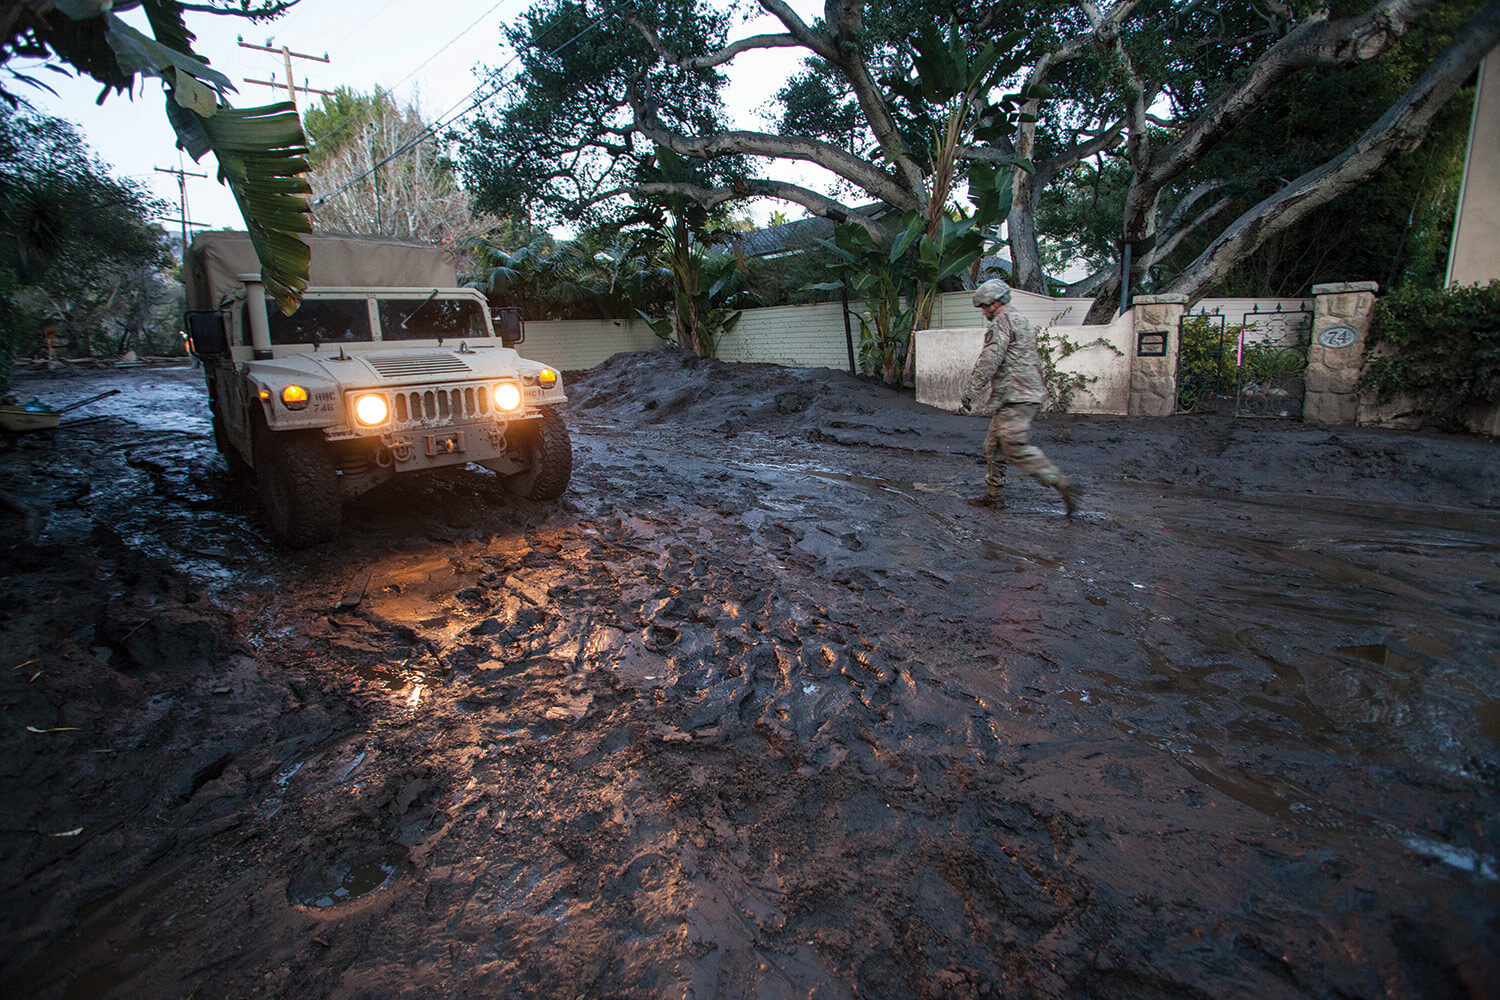 SGT Jose Paiz of the 1114th Composite Truck Company, California National Guard, walks back to a HMMWV, Jan. 12, 2018, after checking the depth of mud further down the street during a rescue mission in Montecito, Calif. California National Guard photo by SrA Crystal Housman.